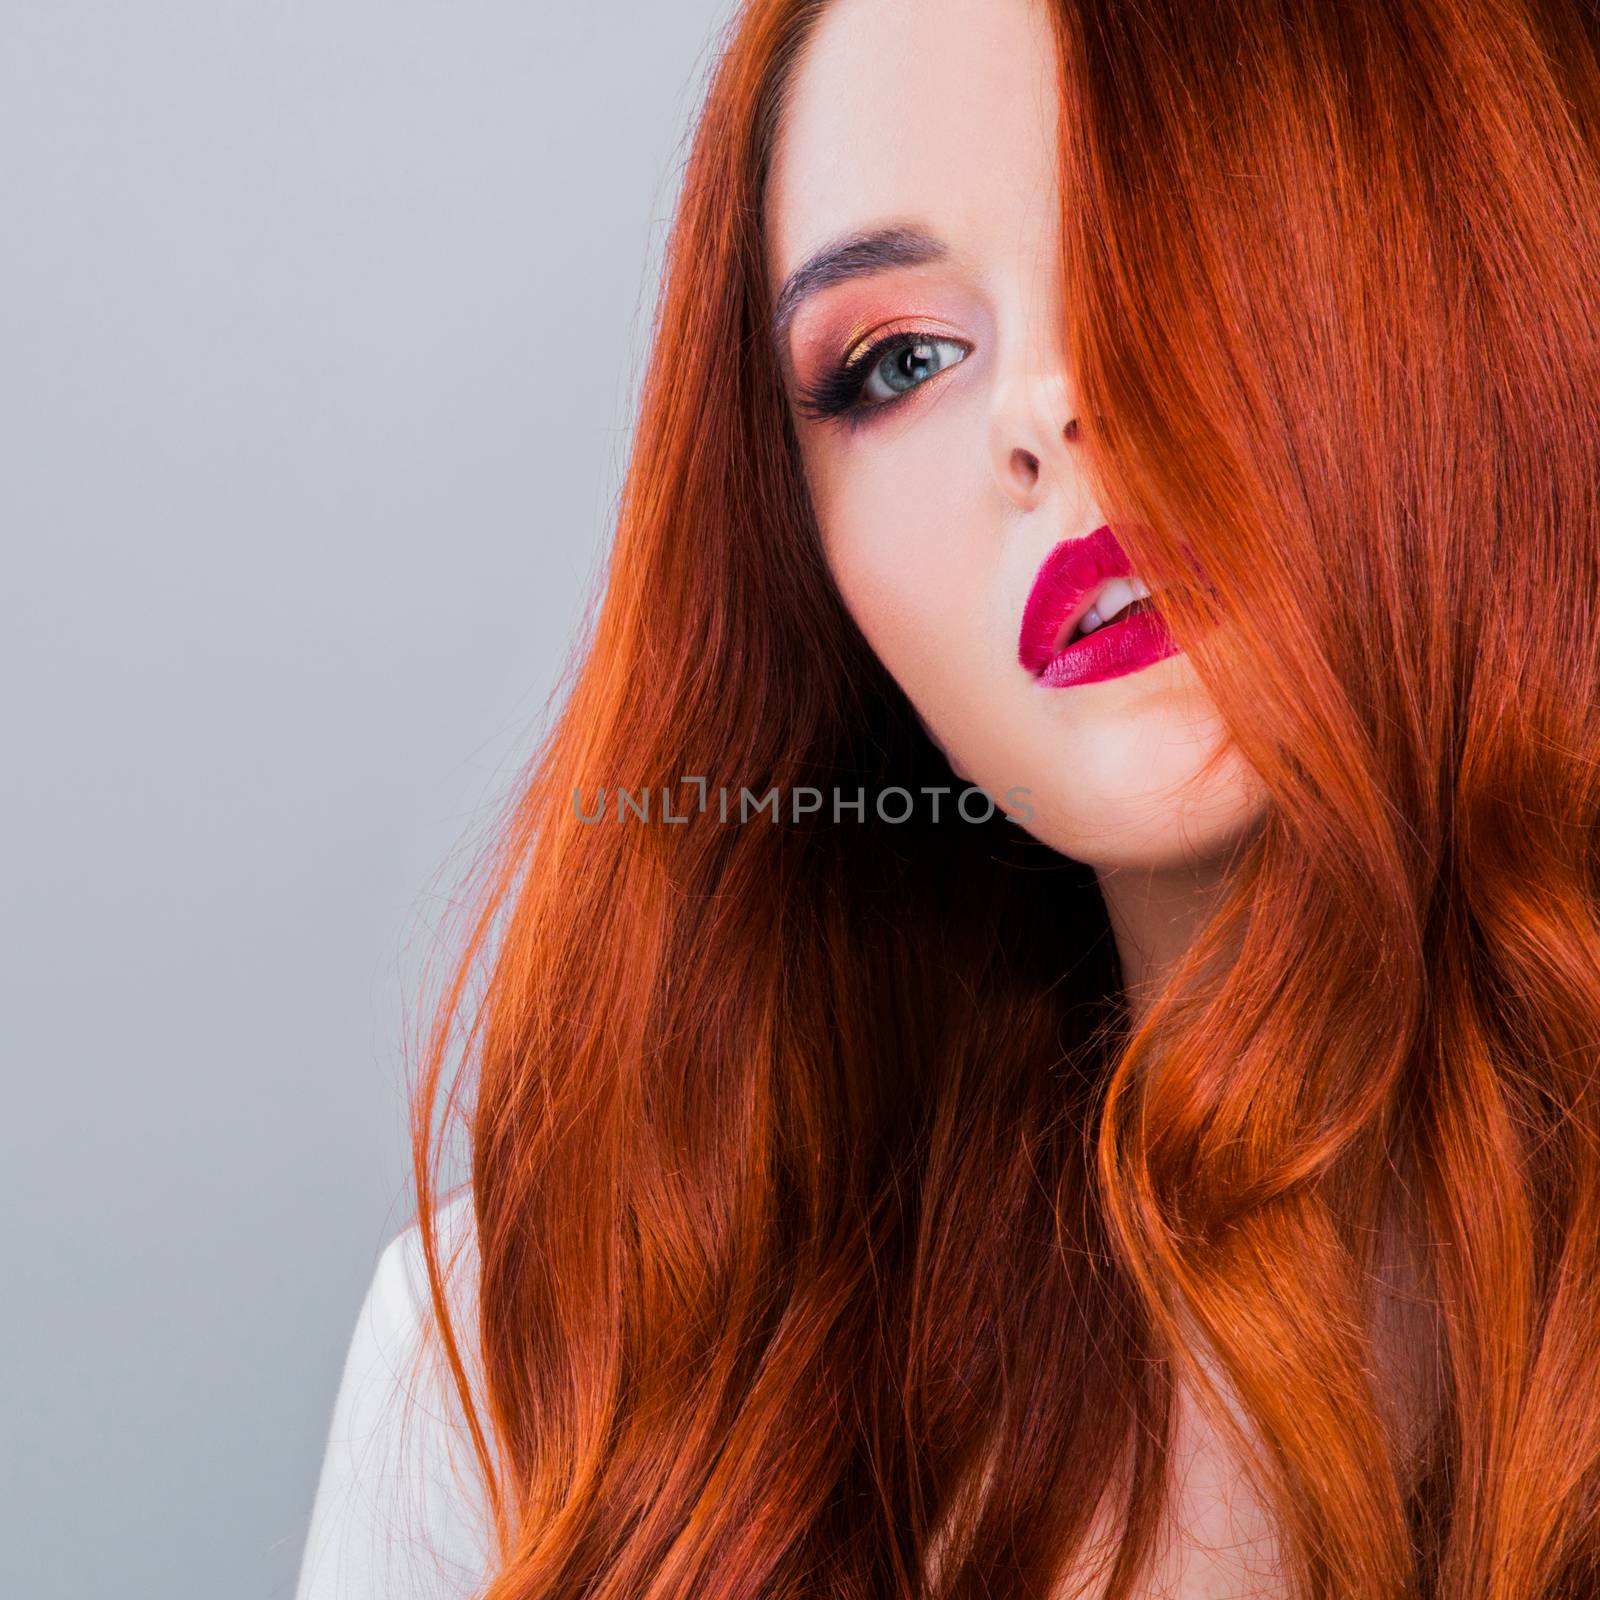 Photoshot of gorgeous redhead girl with bright makeup